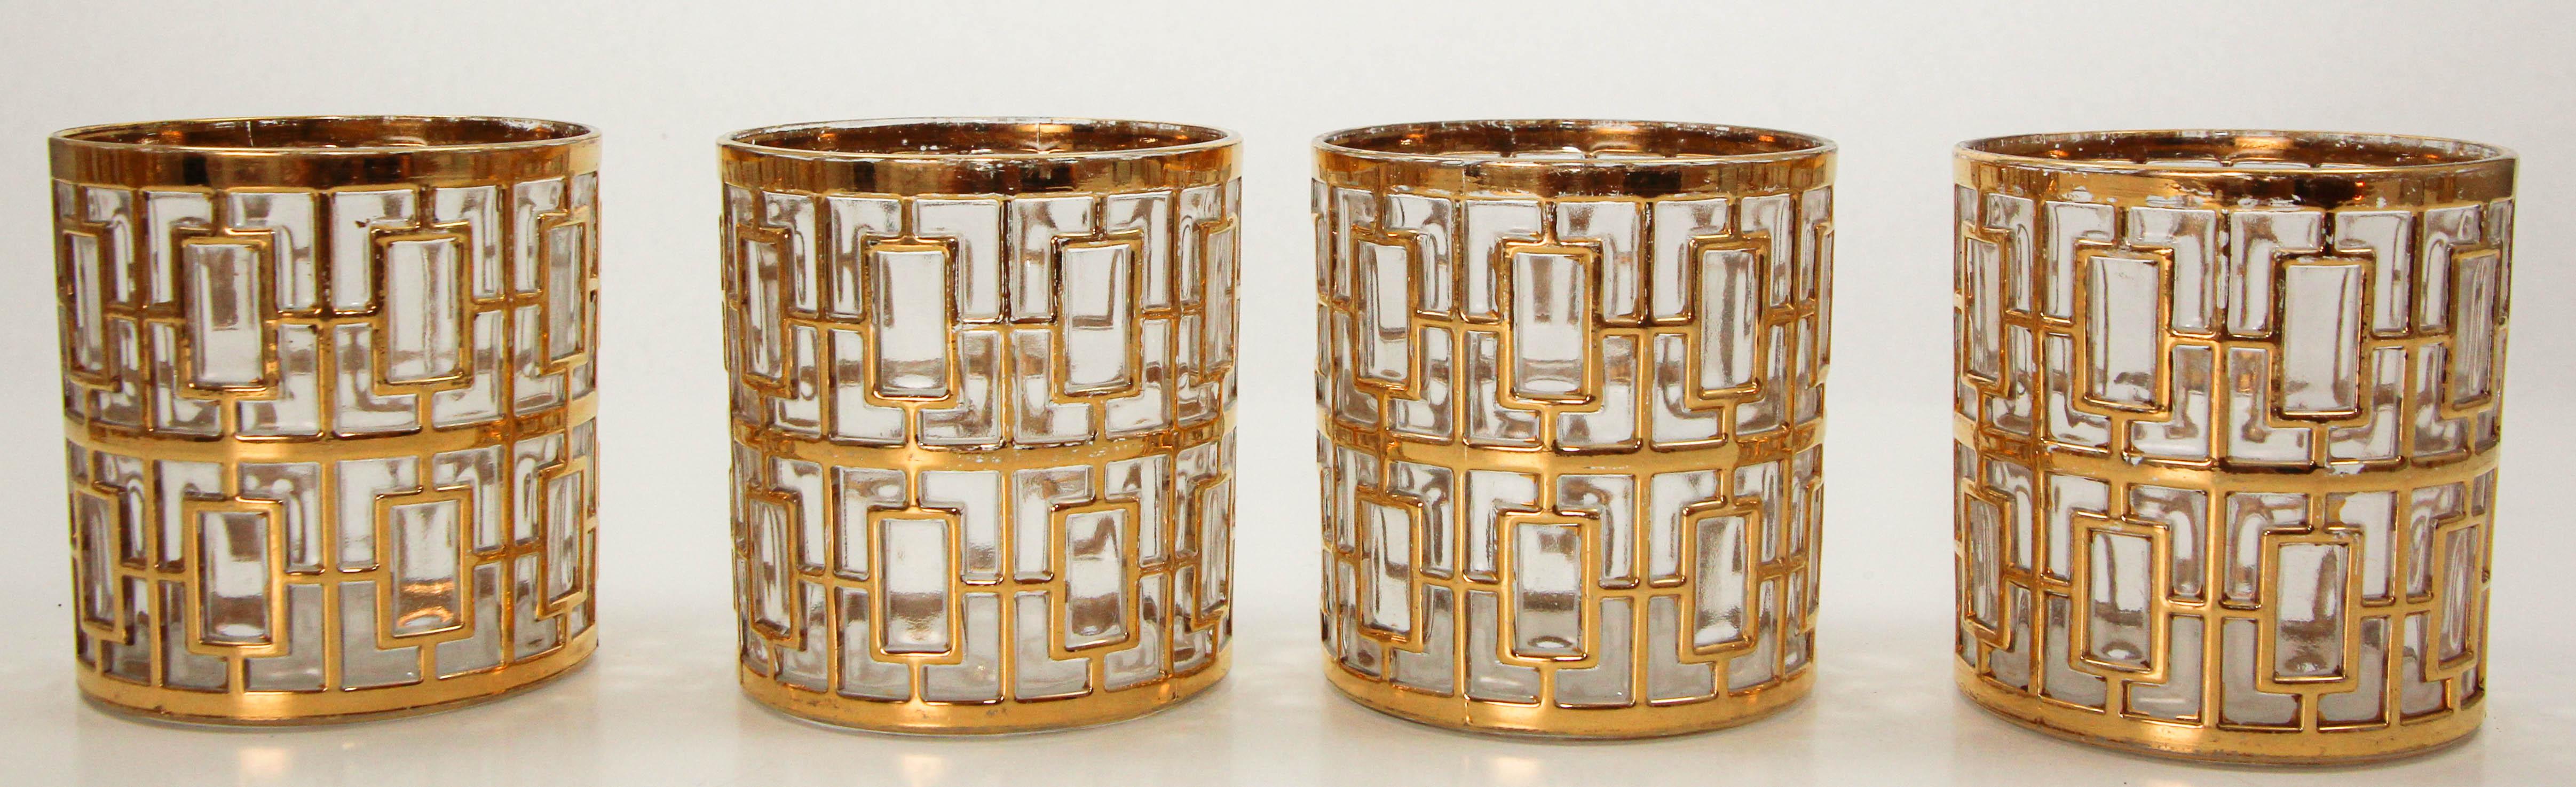 1960s Imperial Shoji Gold Rock Glasses Set of 4 Collectible Barware In Good Condition For Sale In North Hollywood, CA